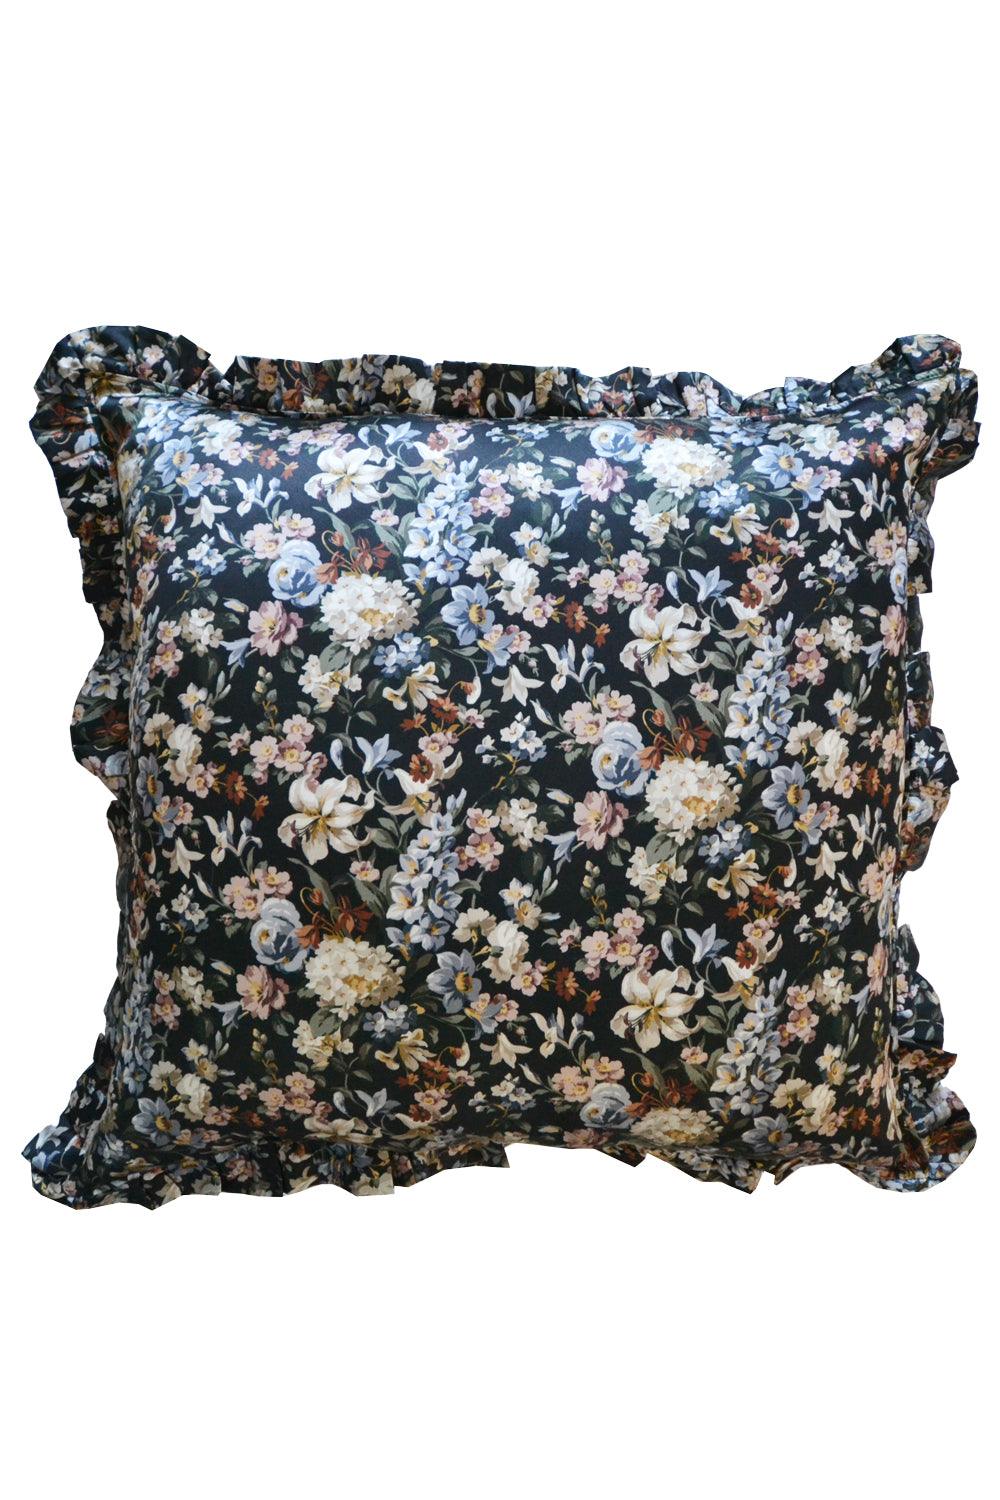 Silk Ruffle Cushion made with Liberty Fabric MONTAGUE MEWS - Coco & Wolf